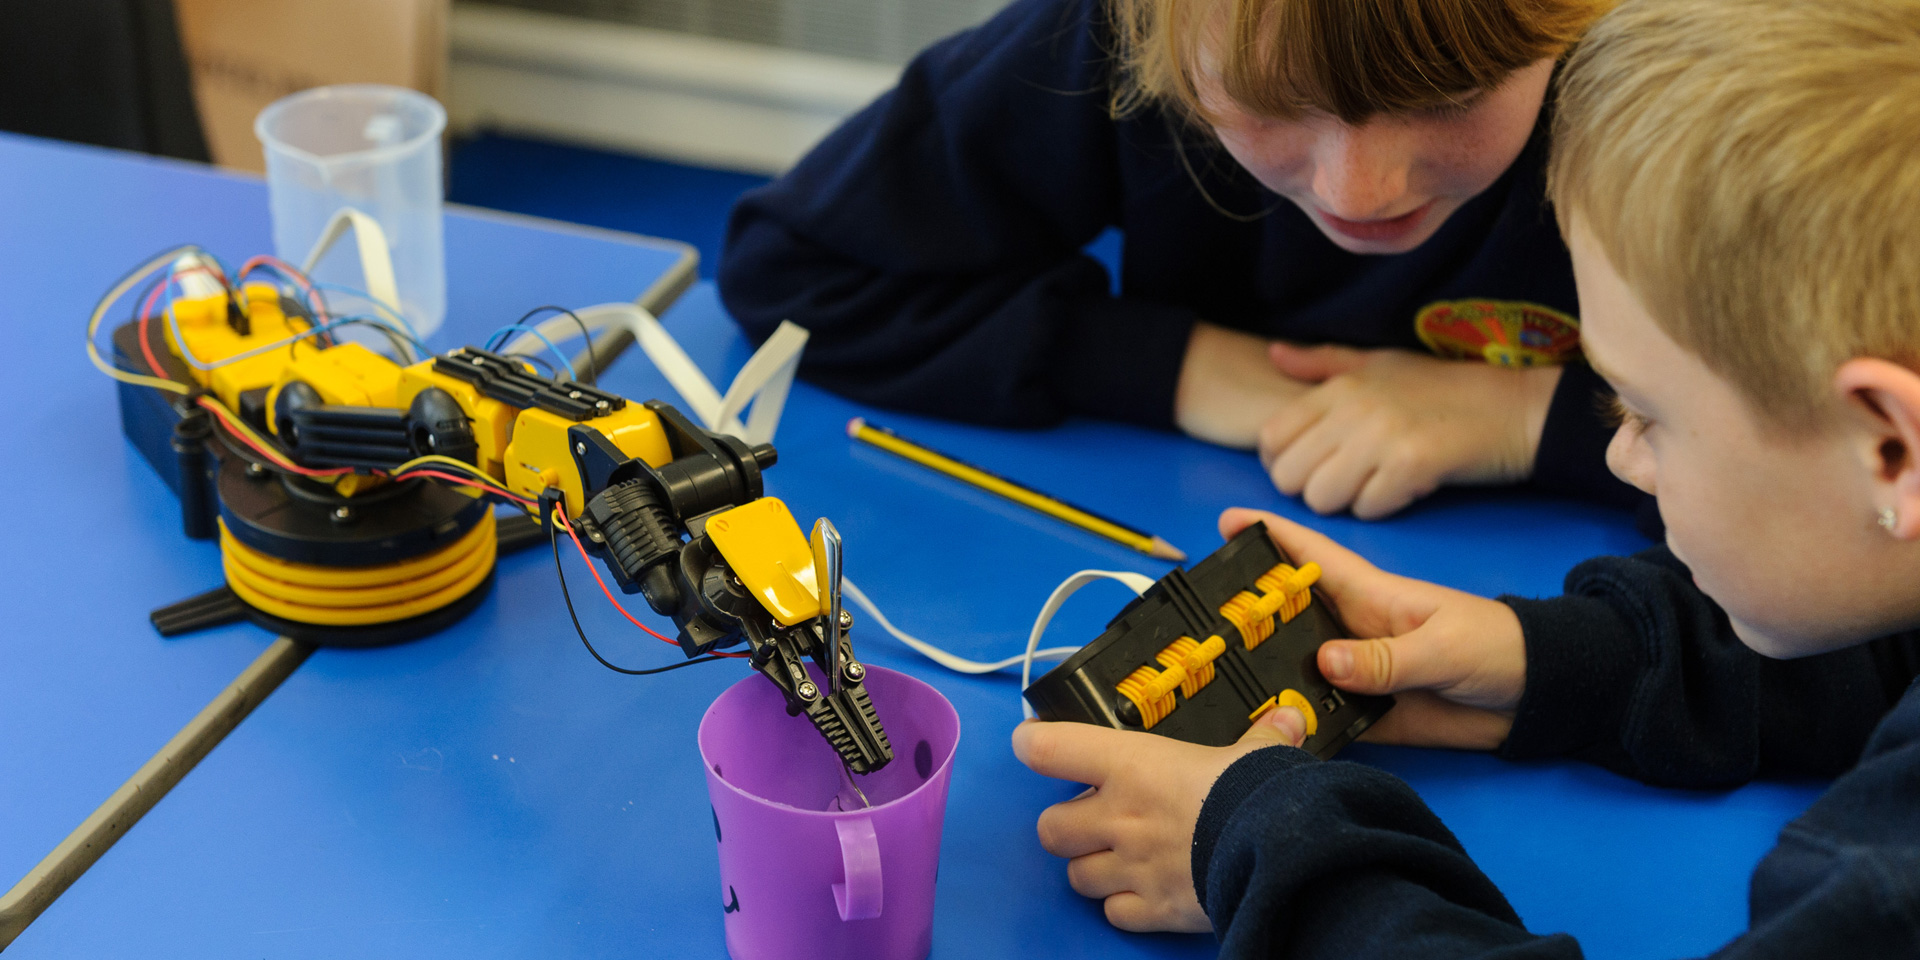 Students operate a robotic arm